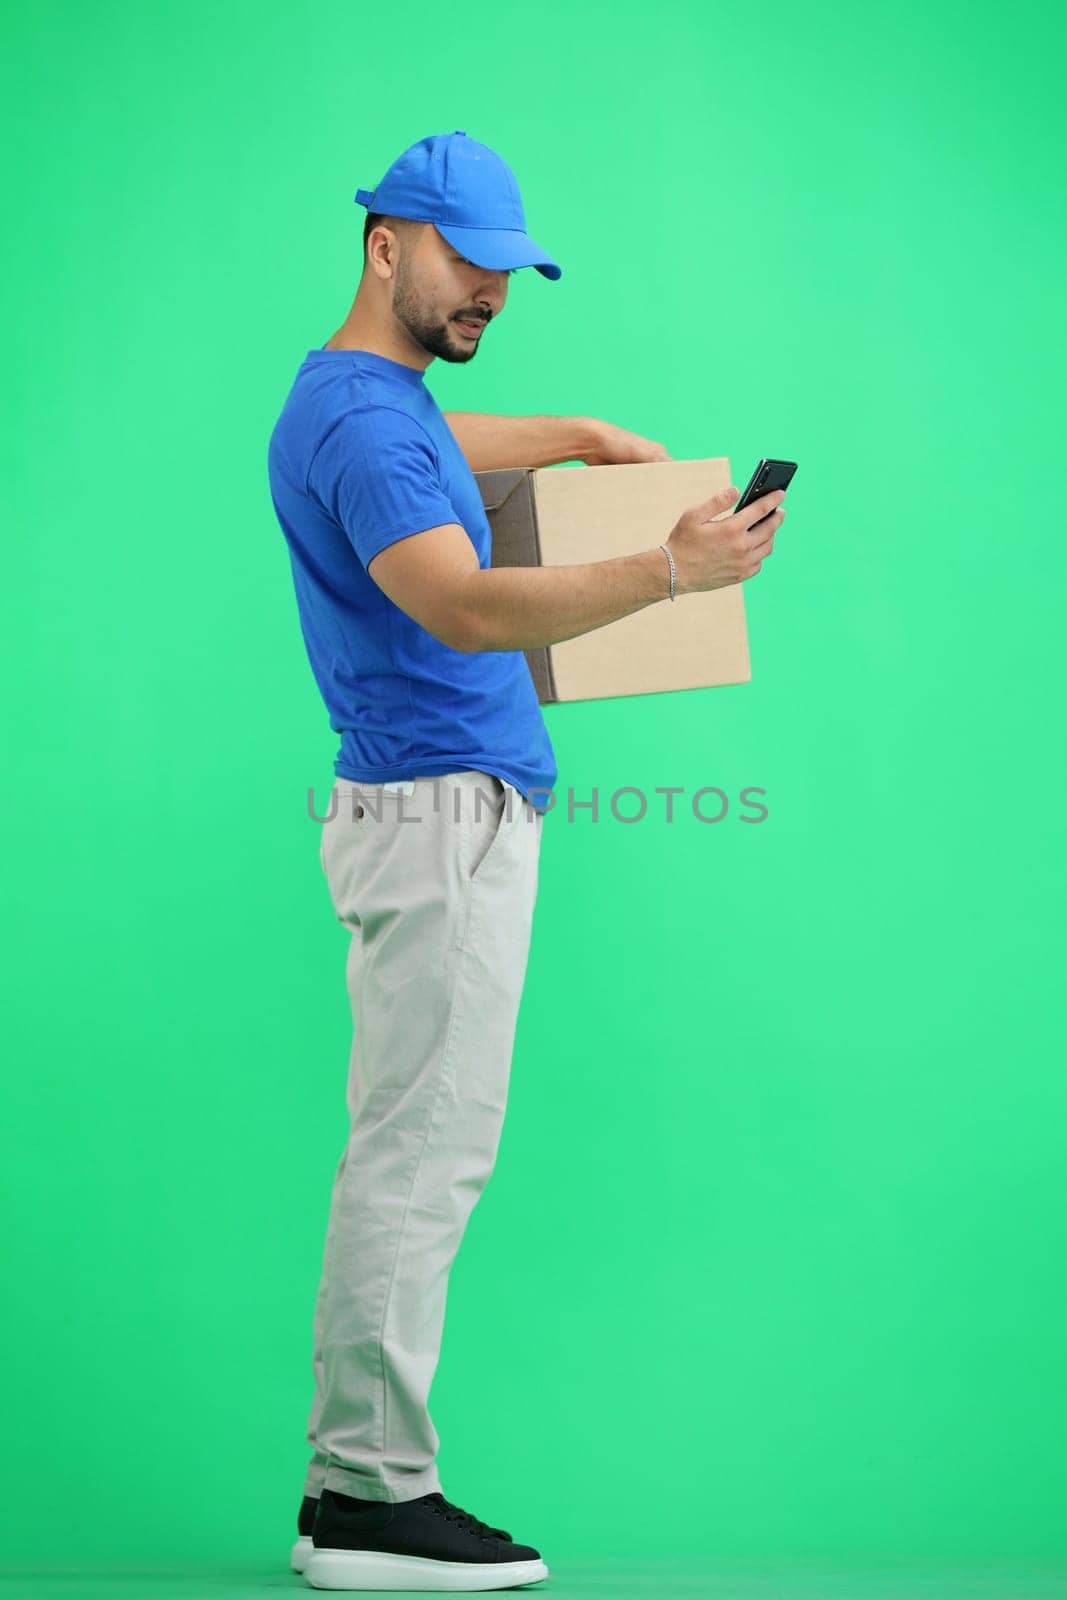 The deliveryman, in full height, on a green background, with a box and a phone by Prosto